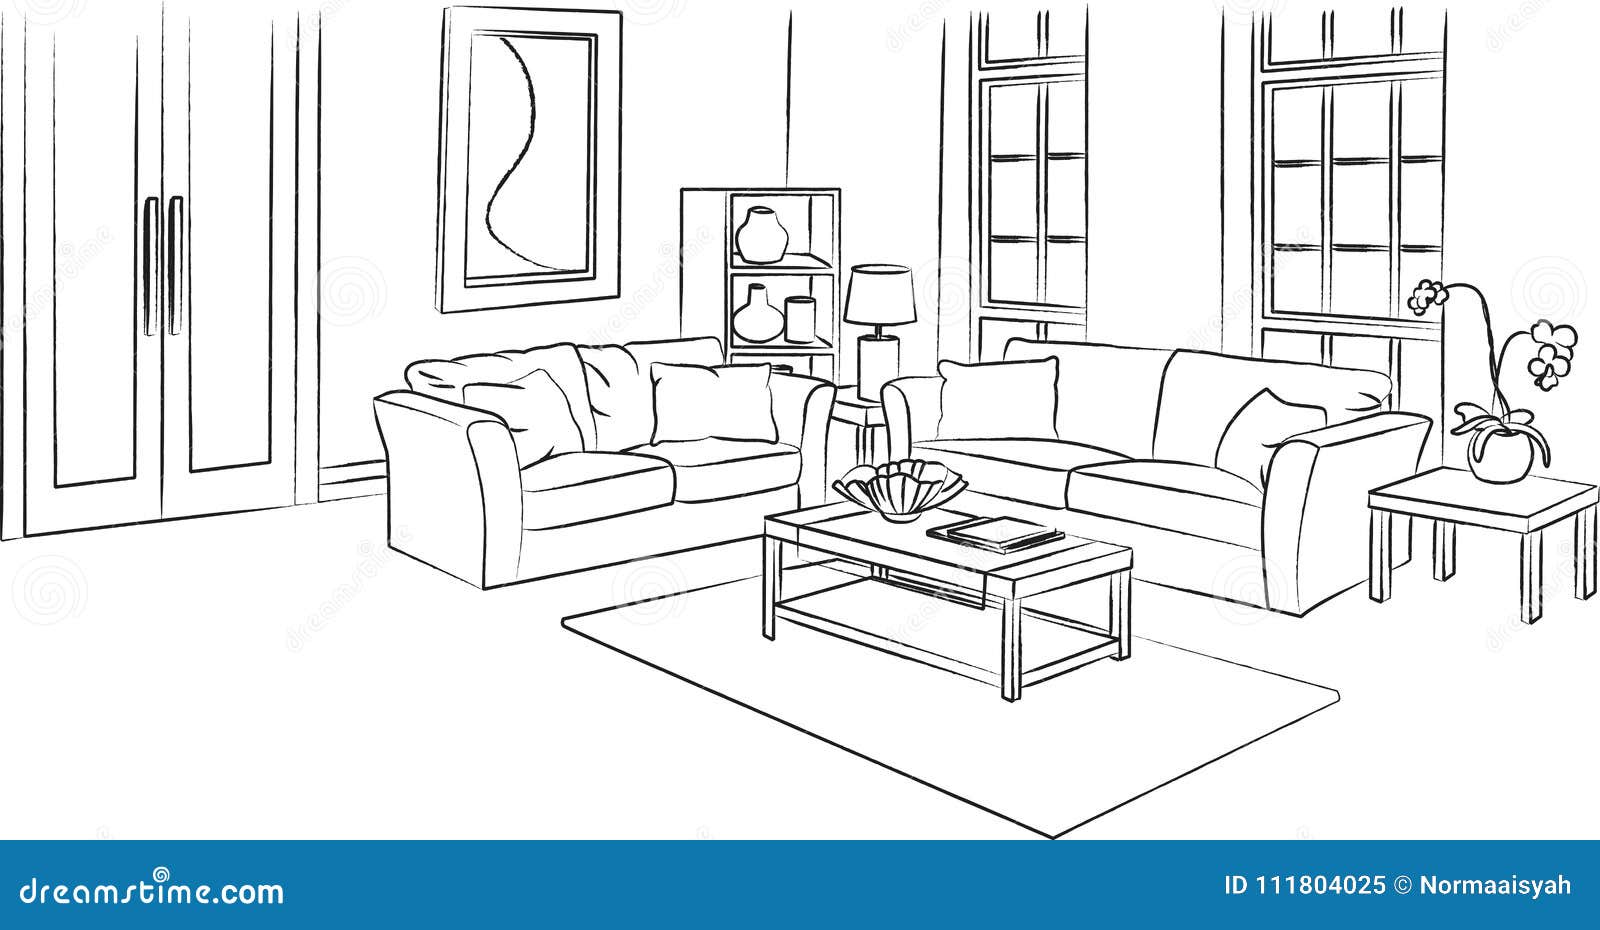 living room clipart black and white